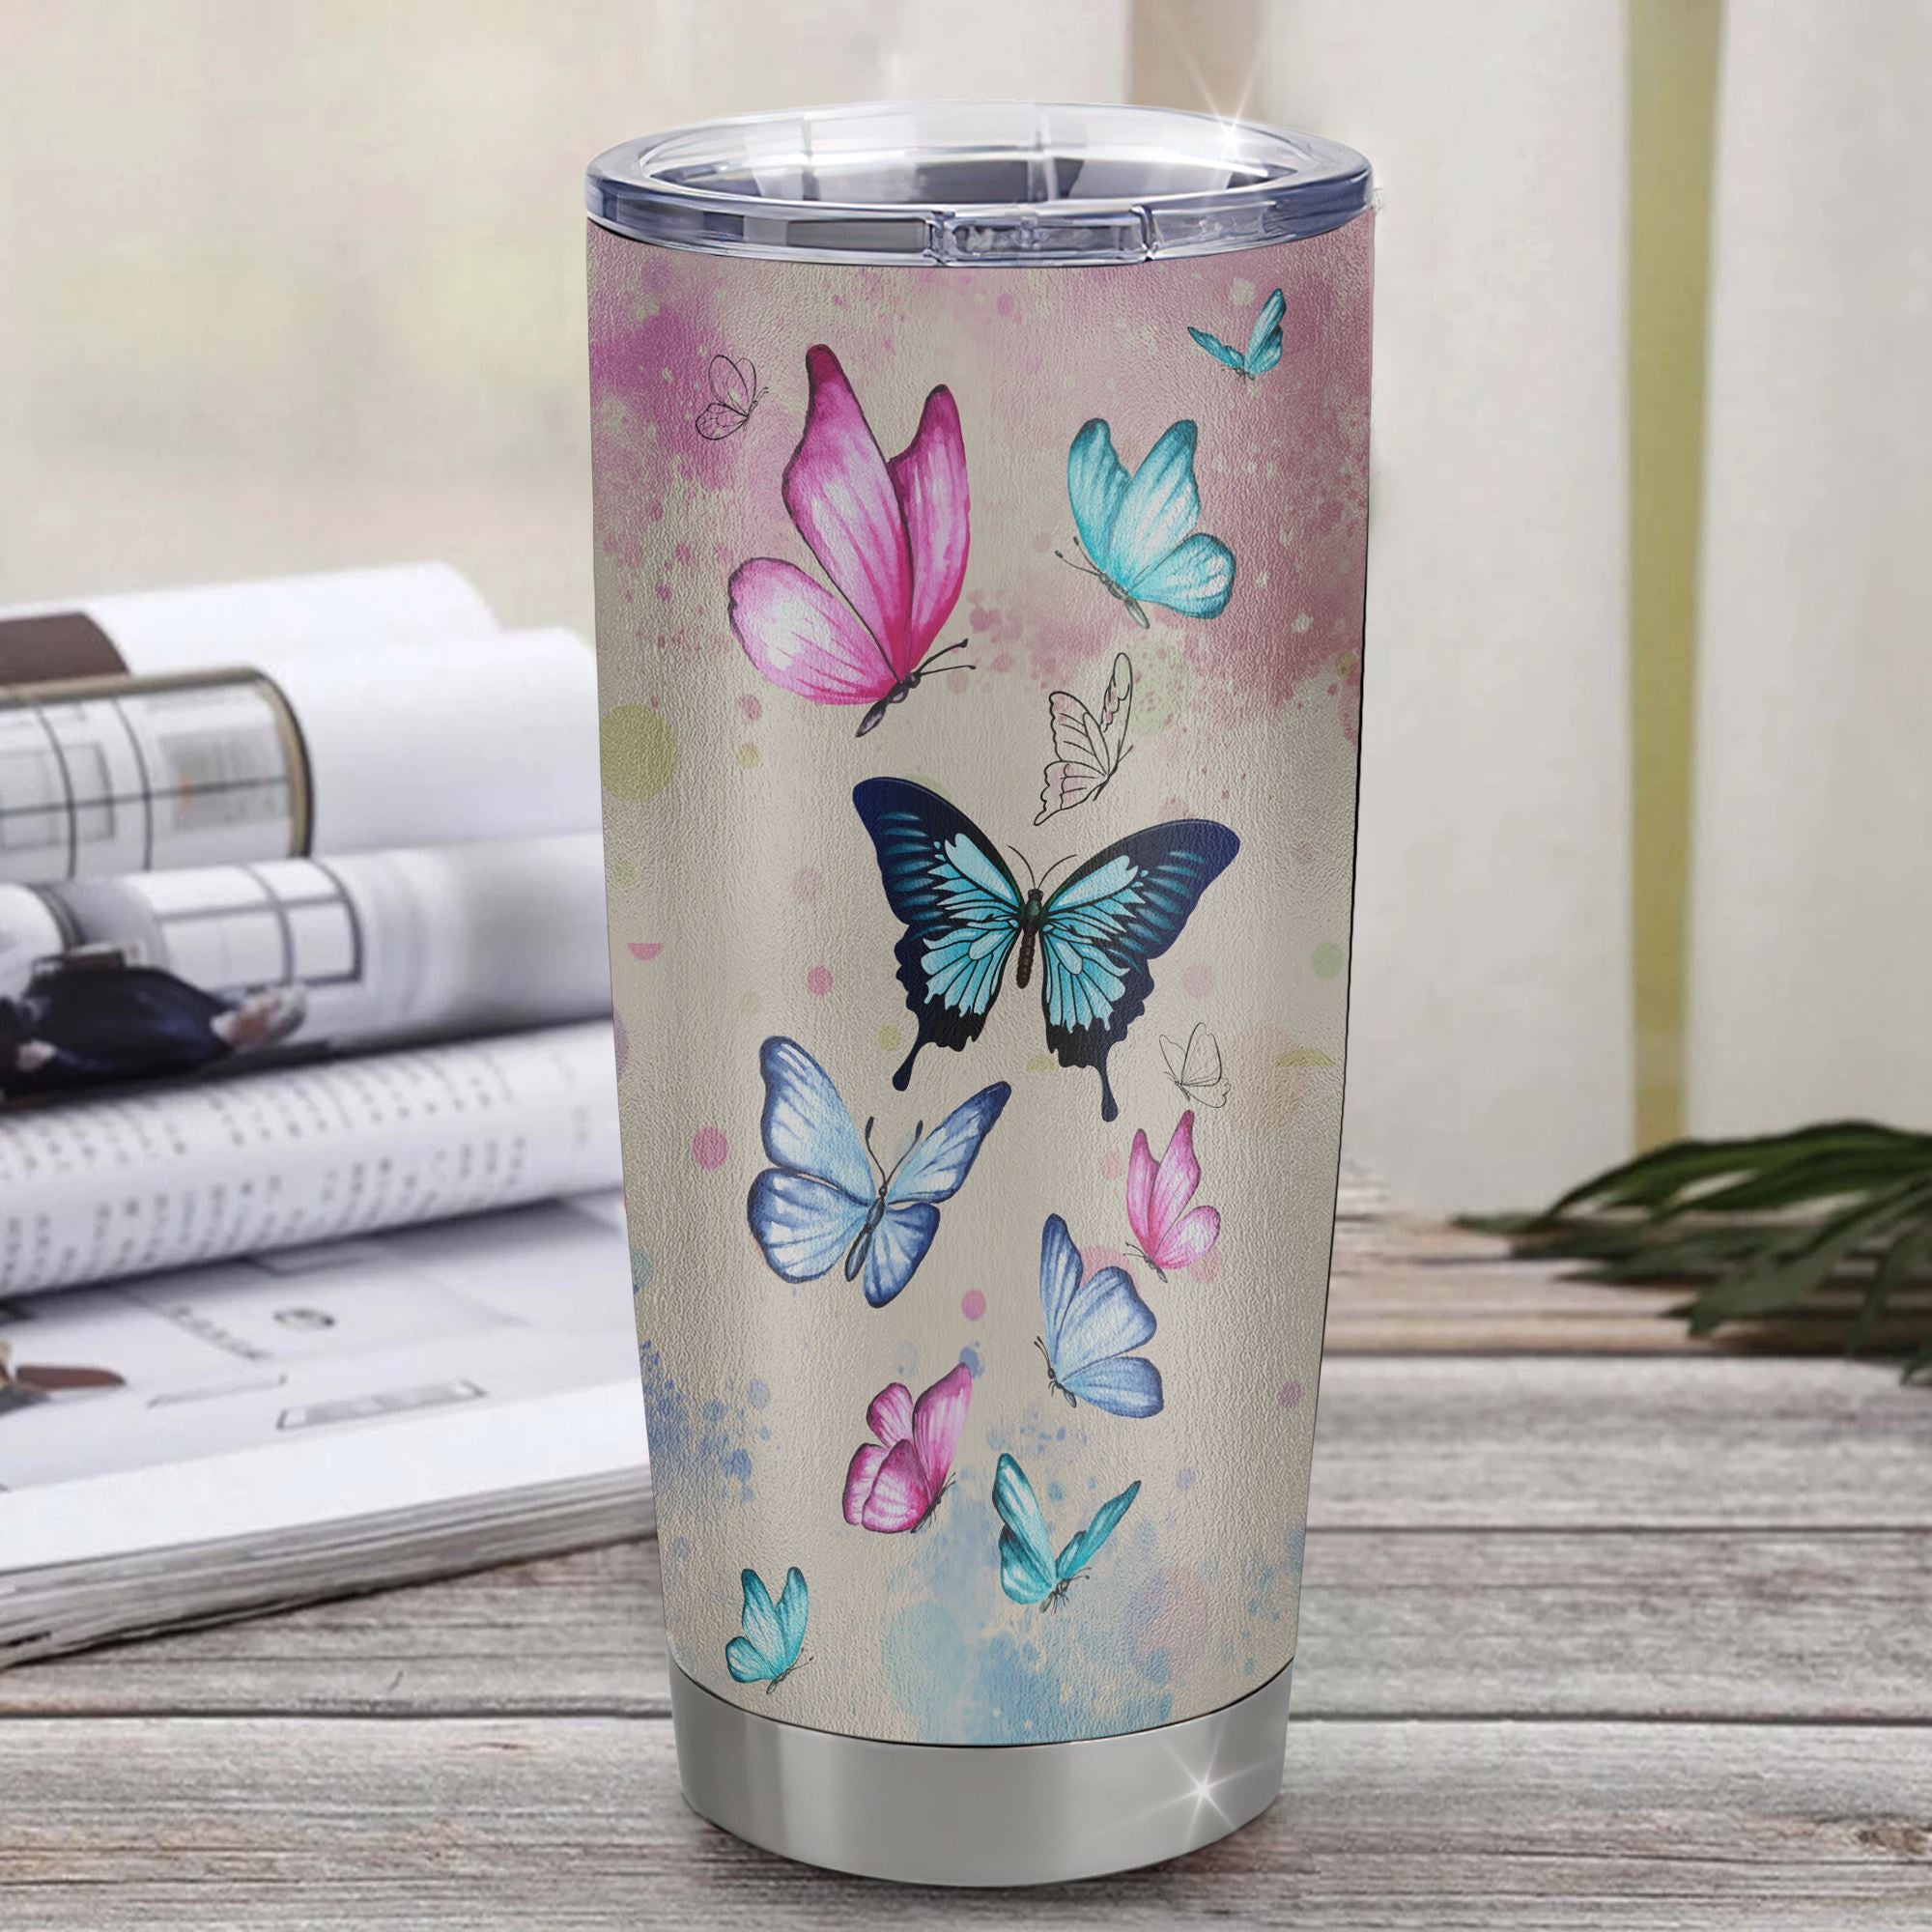 Personalized_To_My_Bonus_Daughter_Tumbler_From_Stepmom_Stainless_Steel_I_Didn_t_Give_You_The_Gift_Of_Life_Butterfly_Stepdaughter_Birthday_Christmas_Travel_Mug_Tumbler_mockup_1.jpg